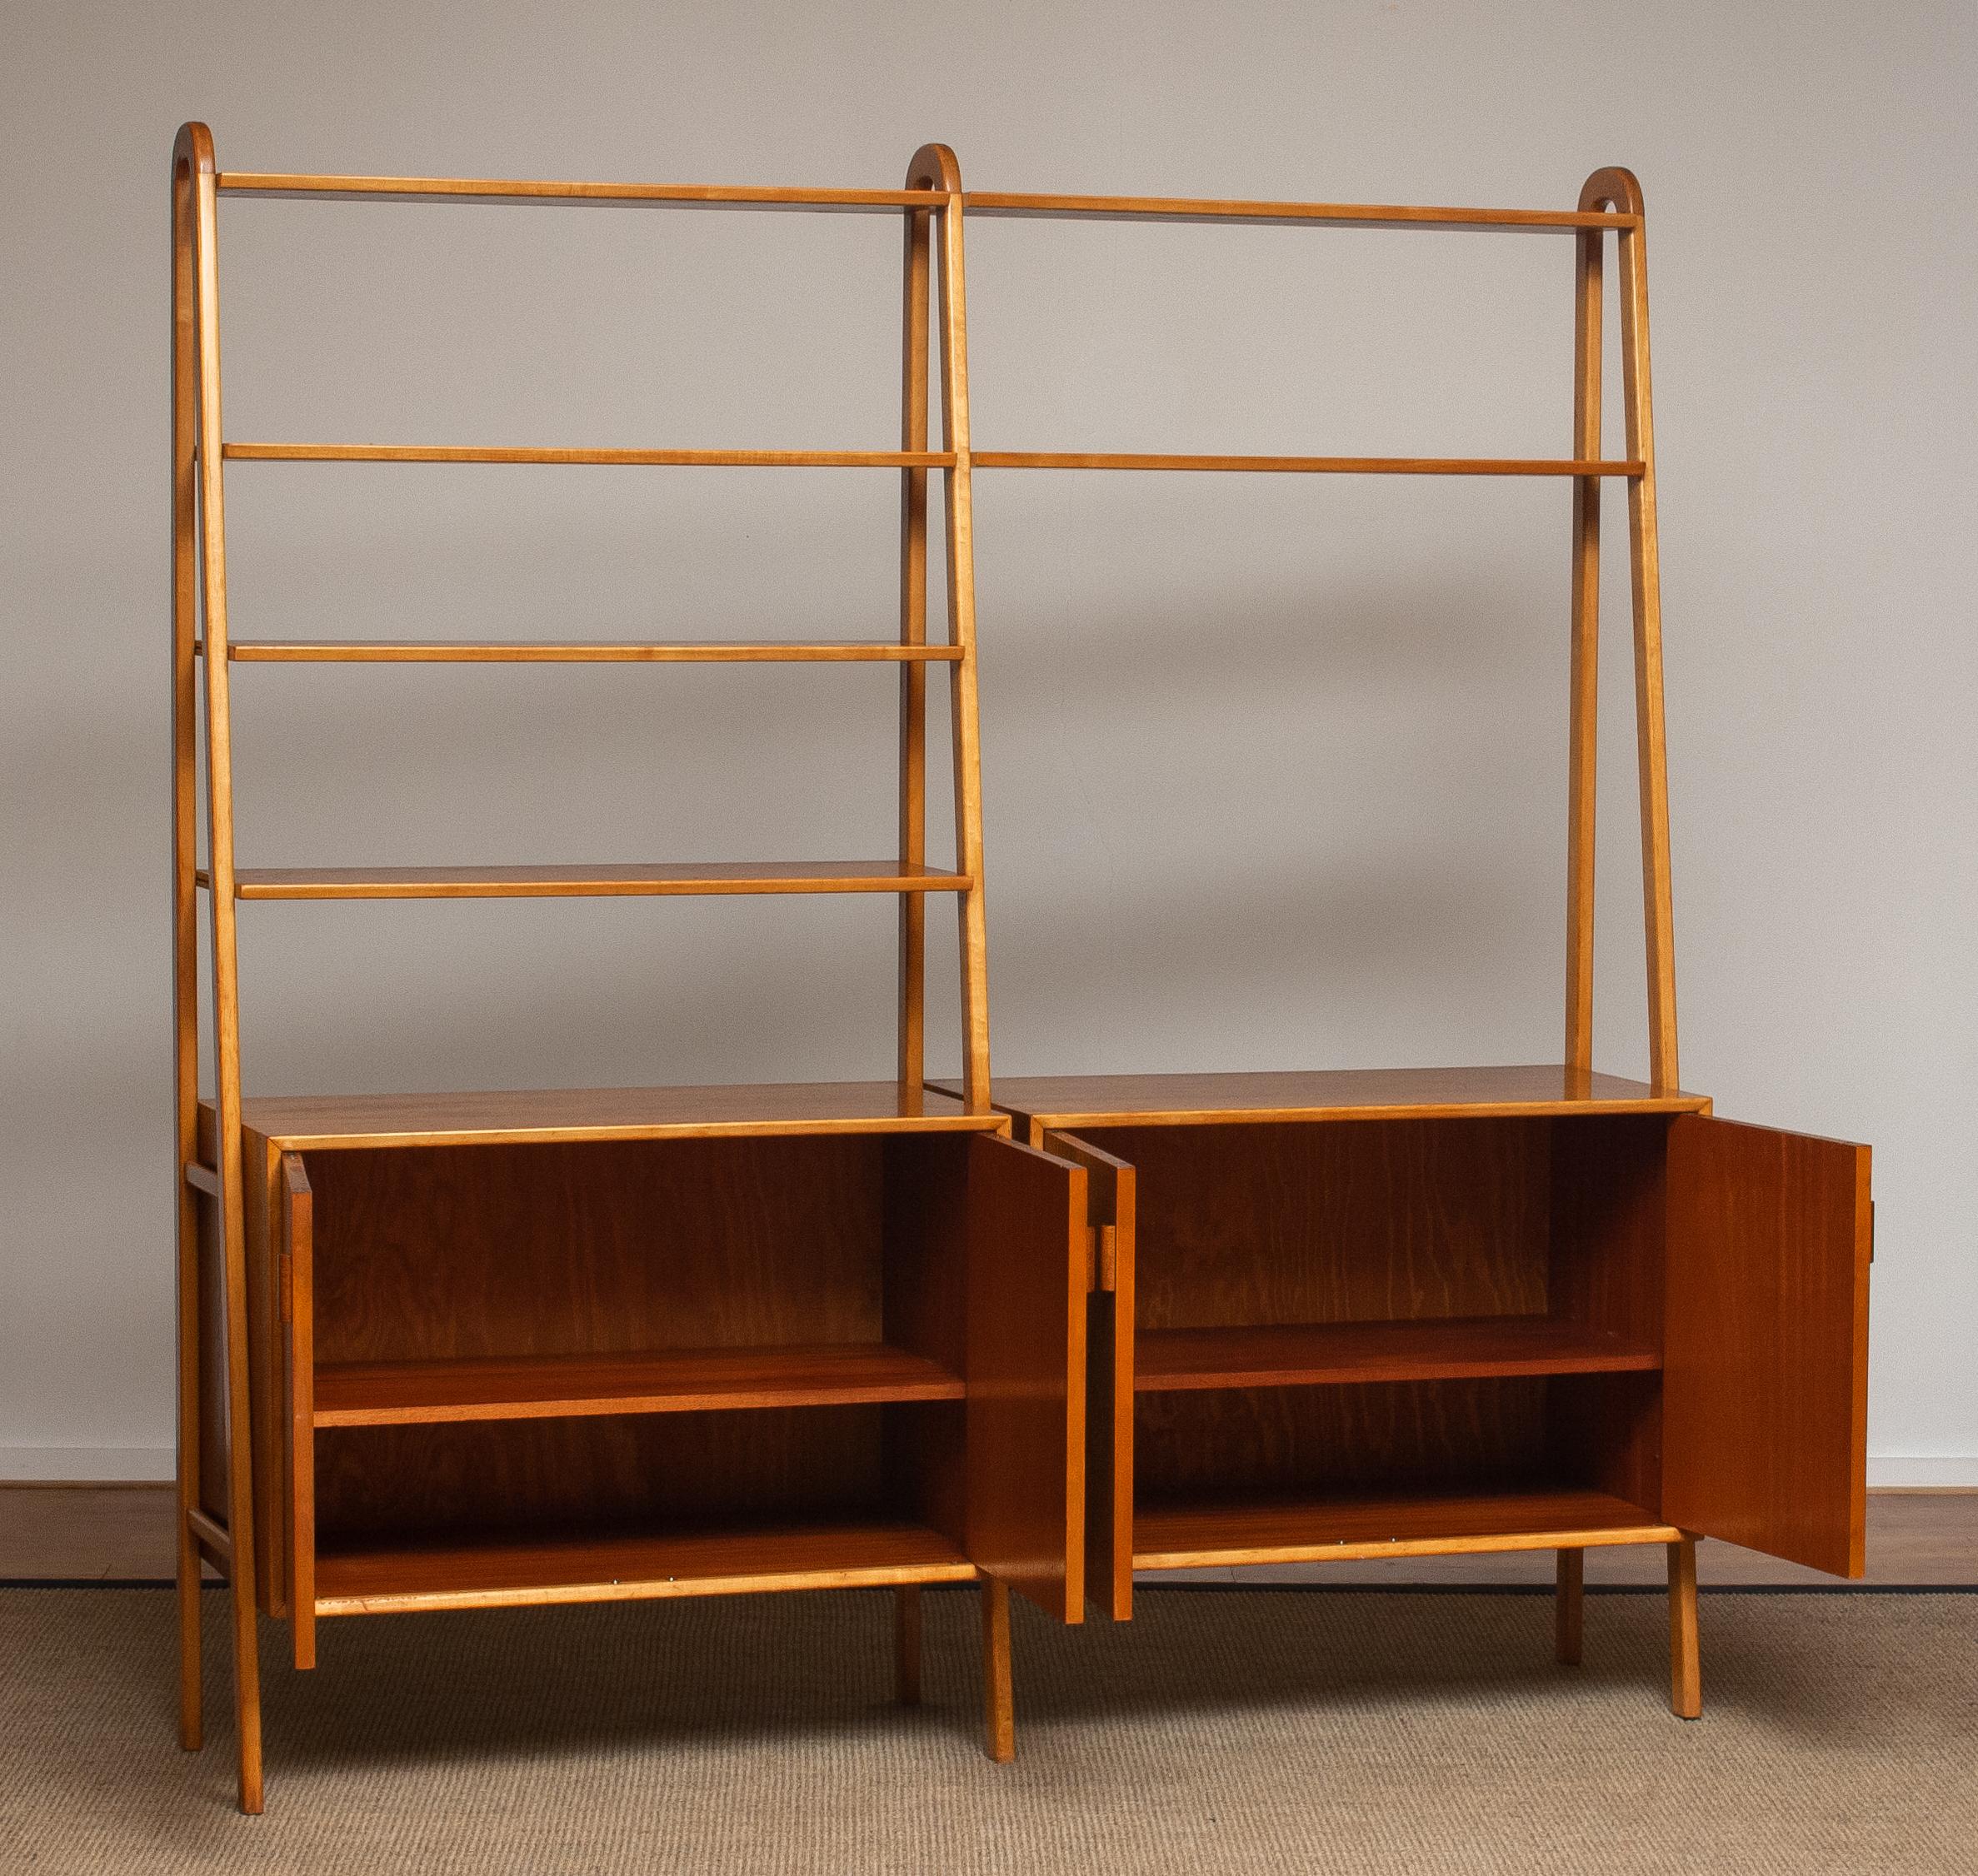 Mid-20th Century 1950s Shelfs / Bookcase / Sideboard in Teak and Beech by Brantorps, Sweden